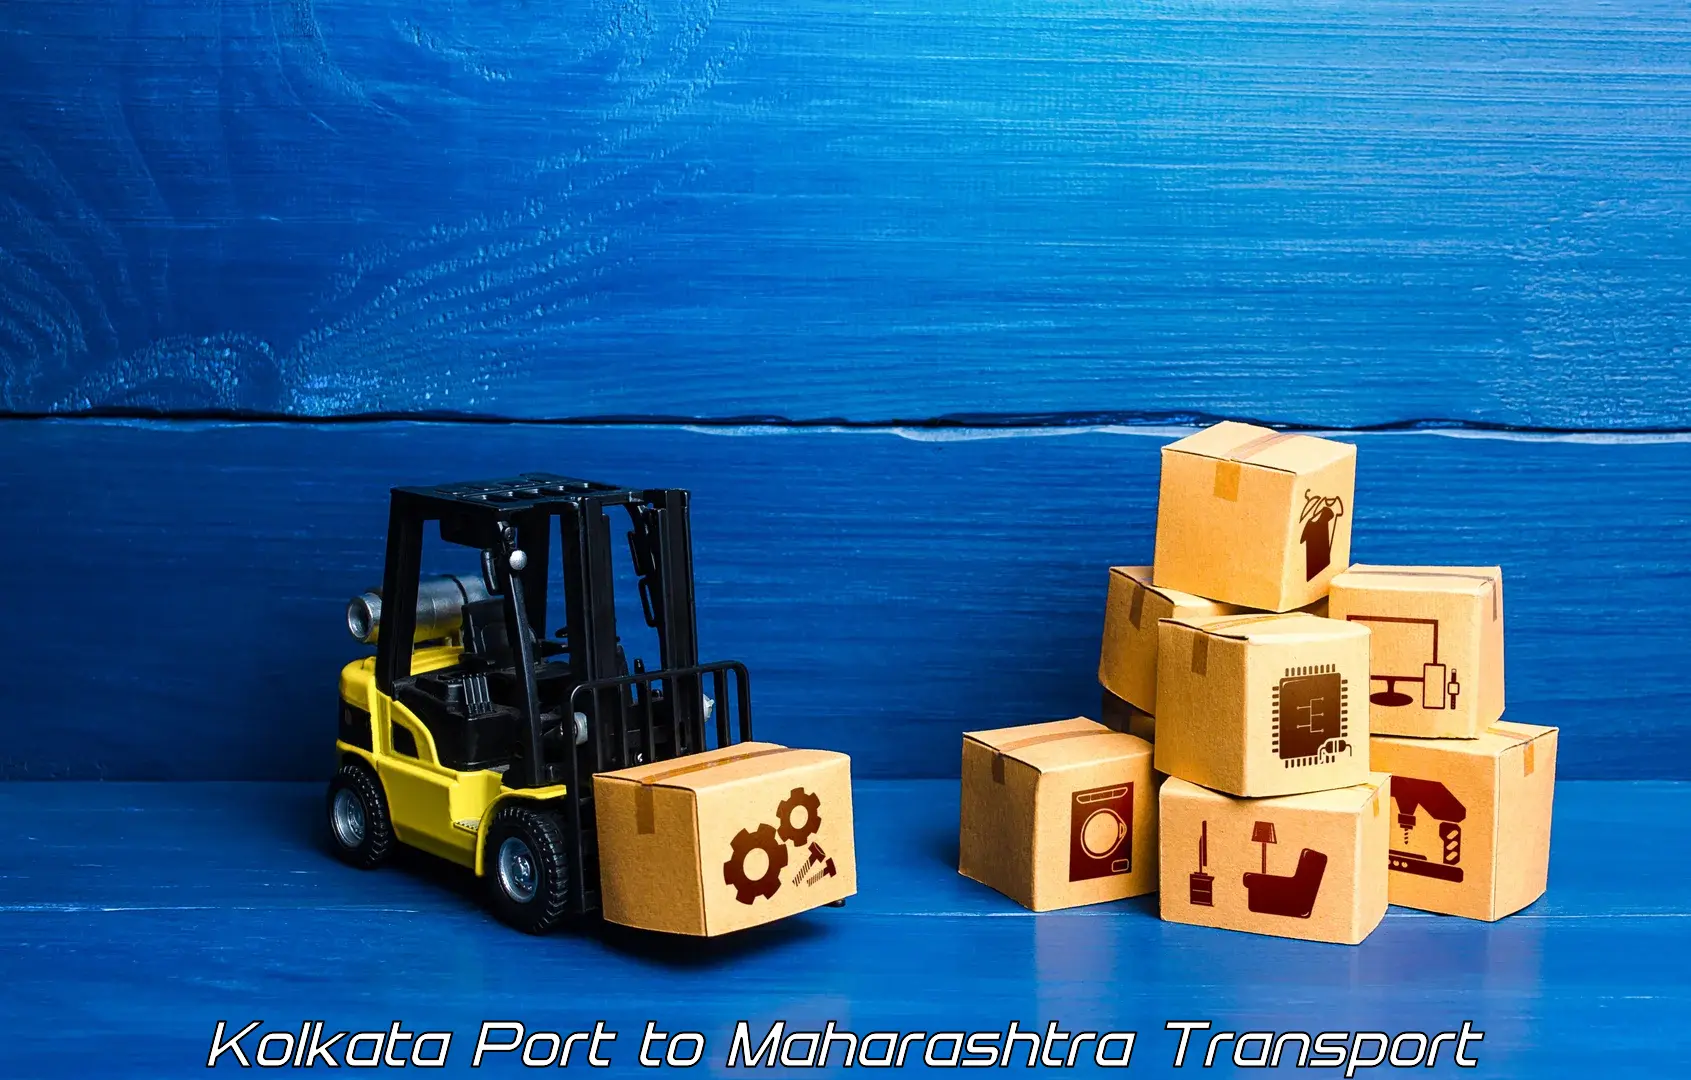 Interstate transport services Kolkata Port to Greater Thane